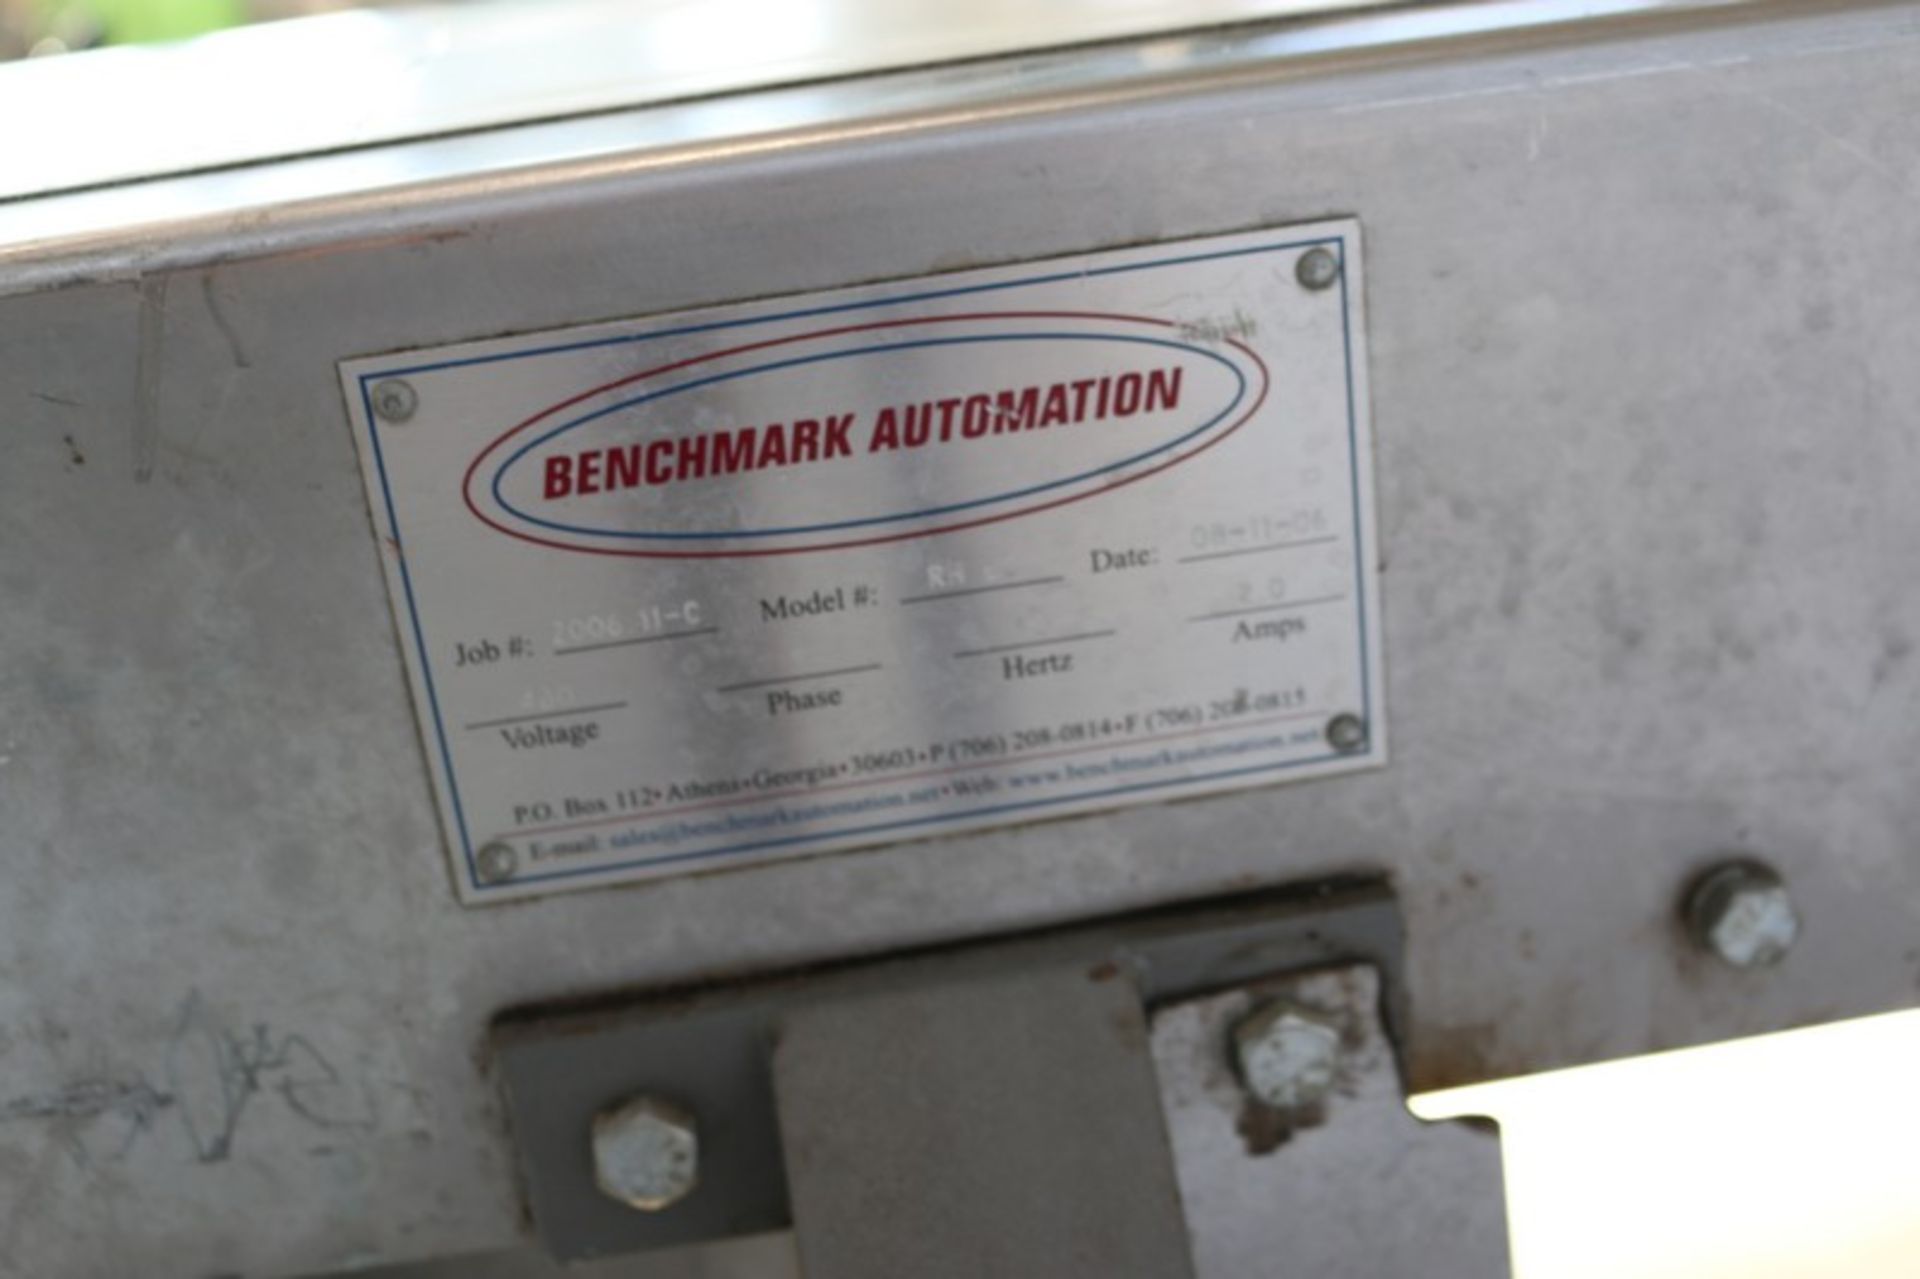 Benchmark Automation S/S Conveyor, M/N RH BC, Job #: 2006 11-C, 480 Volts, 3 Phase, Aprox. 72" L - Image 9 of 10